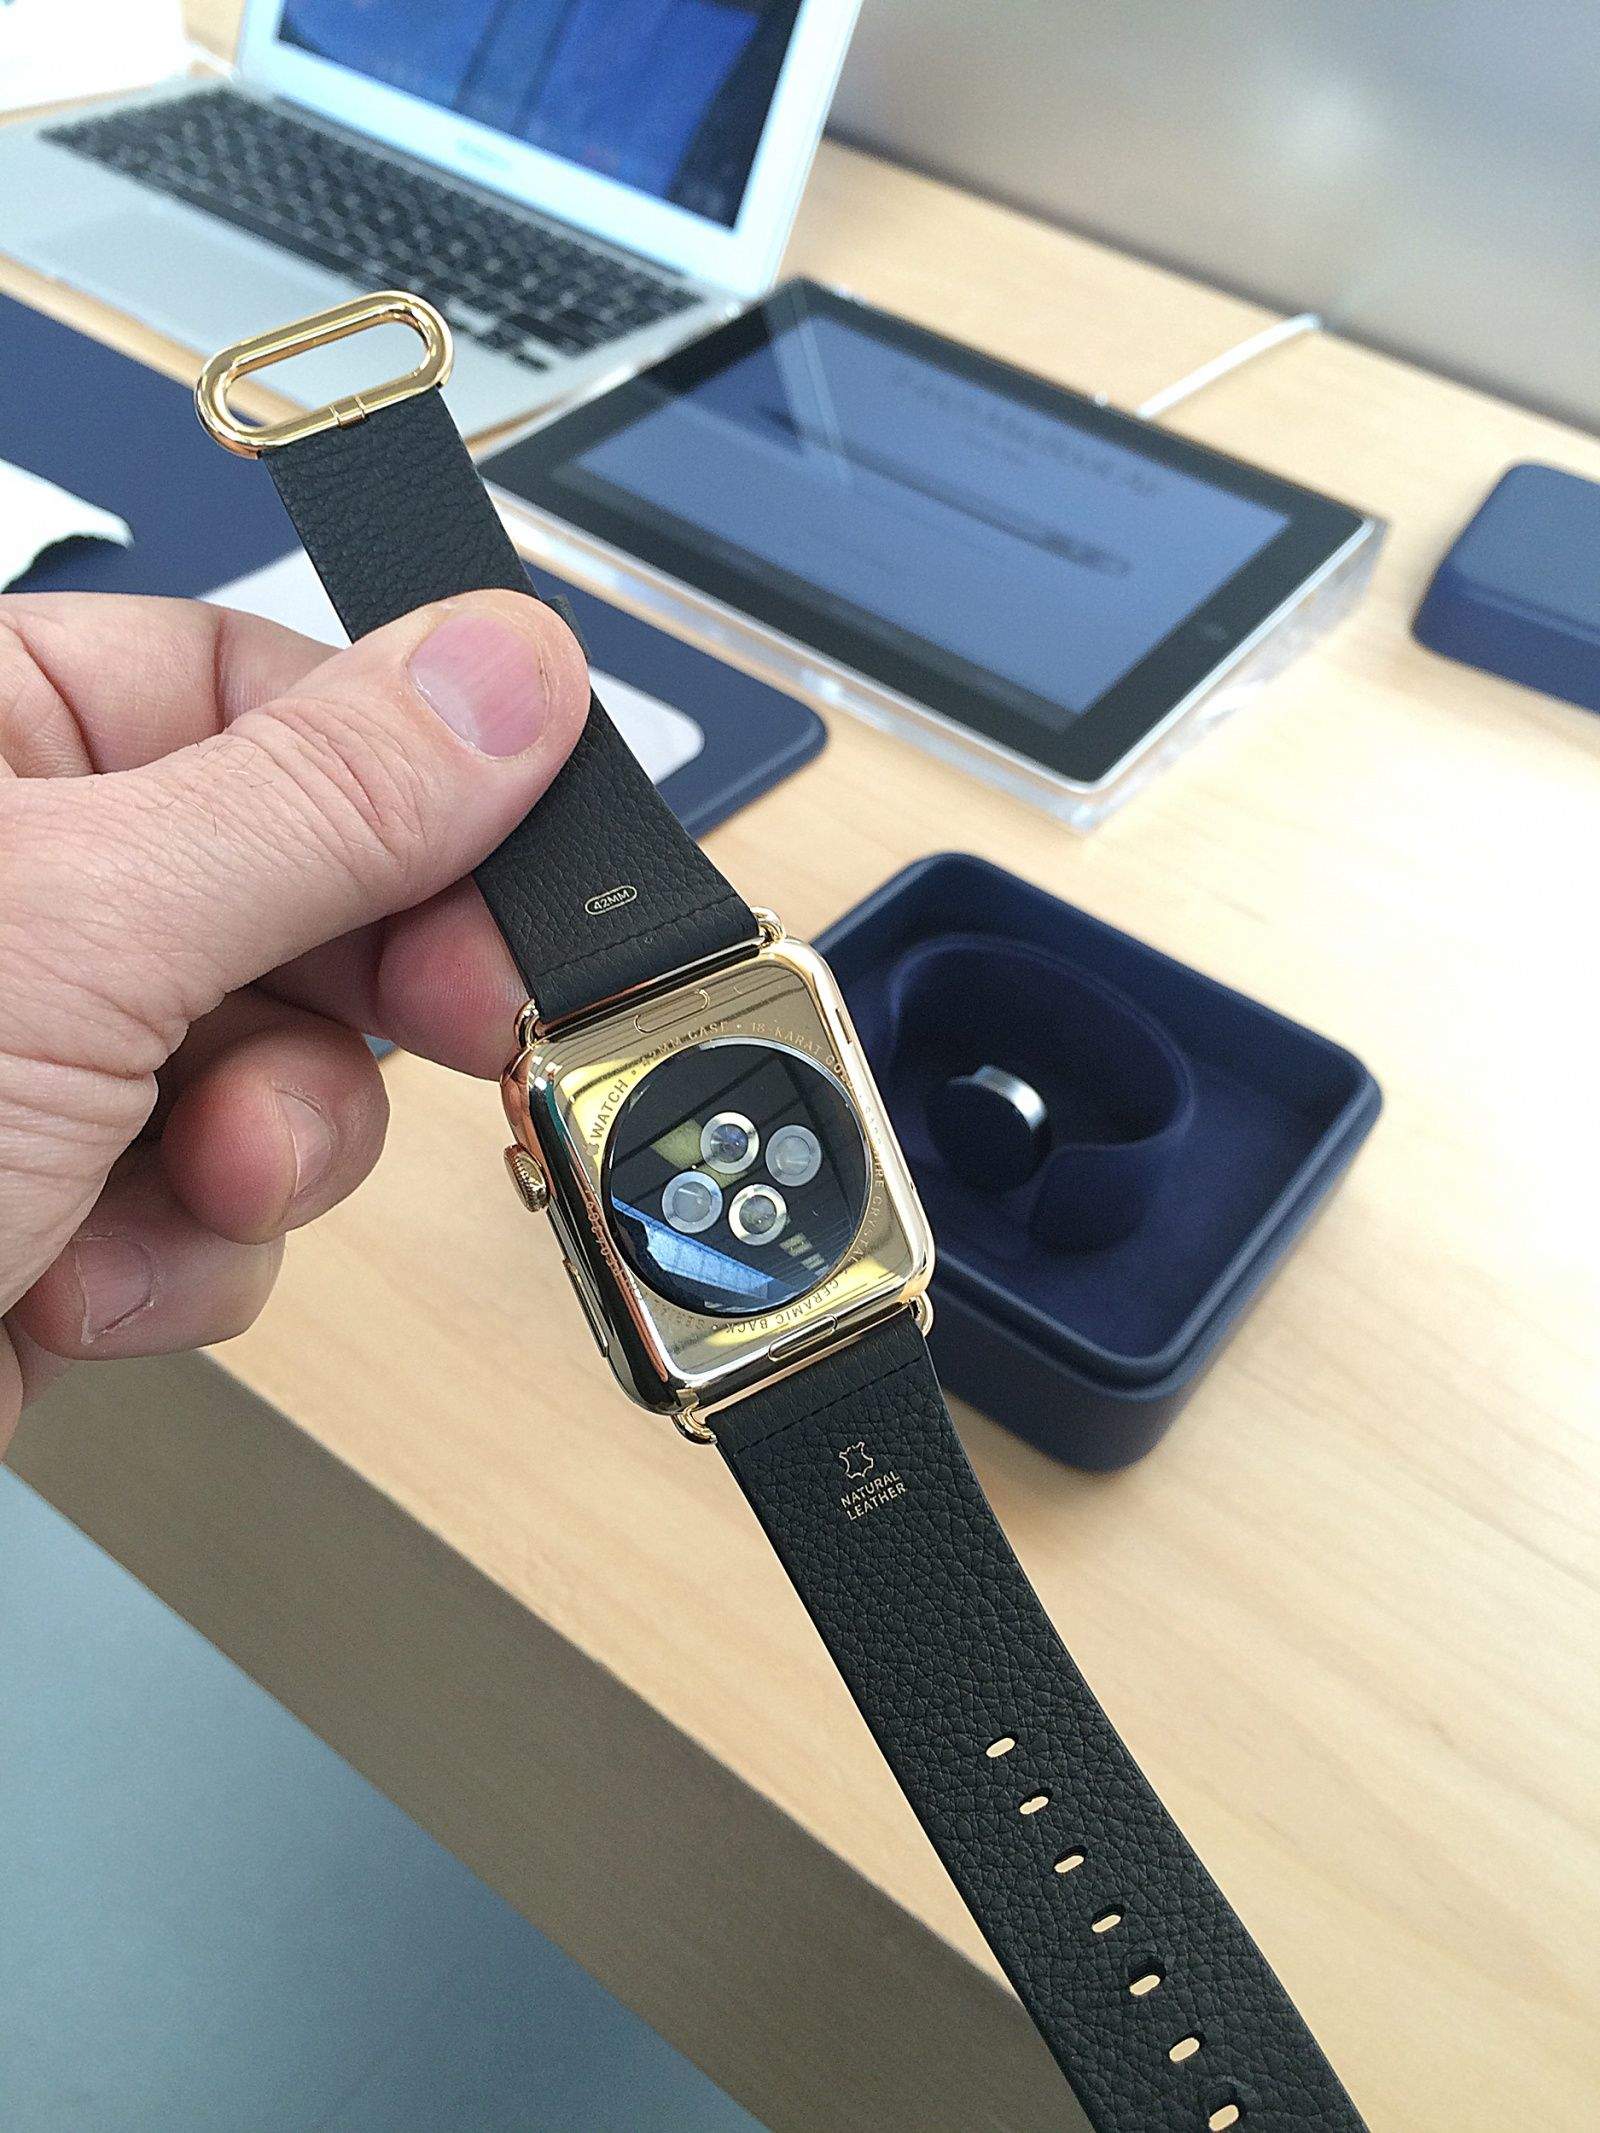 The Apple Watch Edition, released in 2015, was made of 18-karat gold.